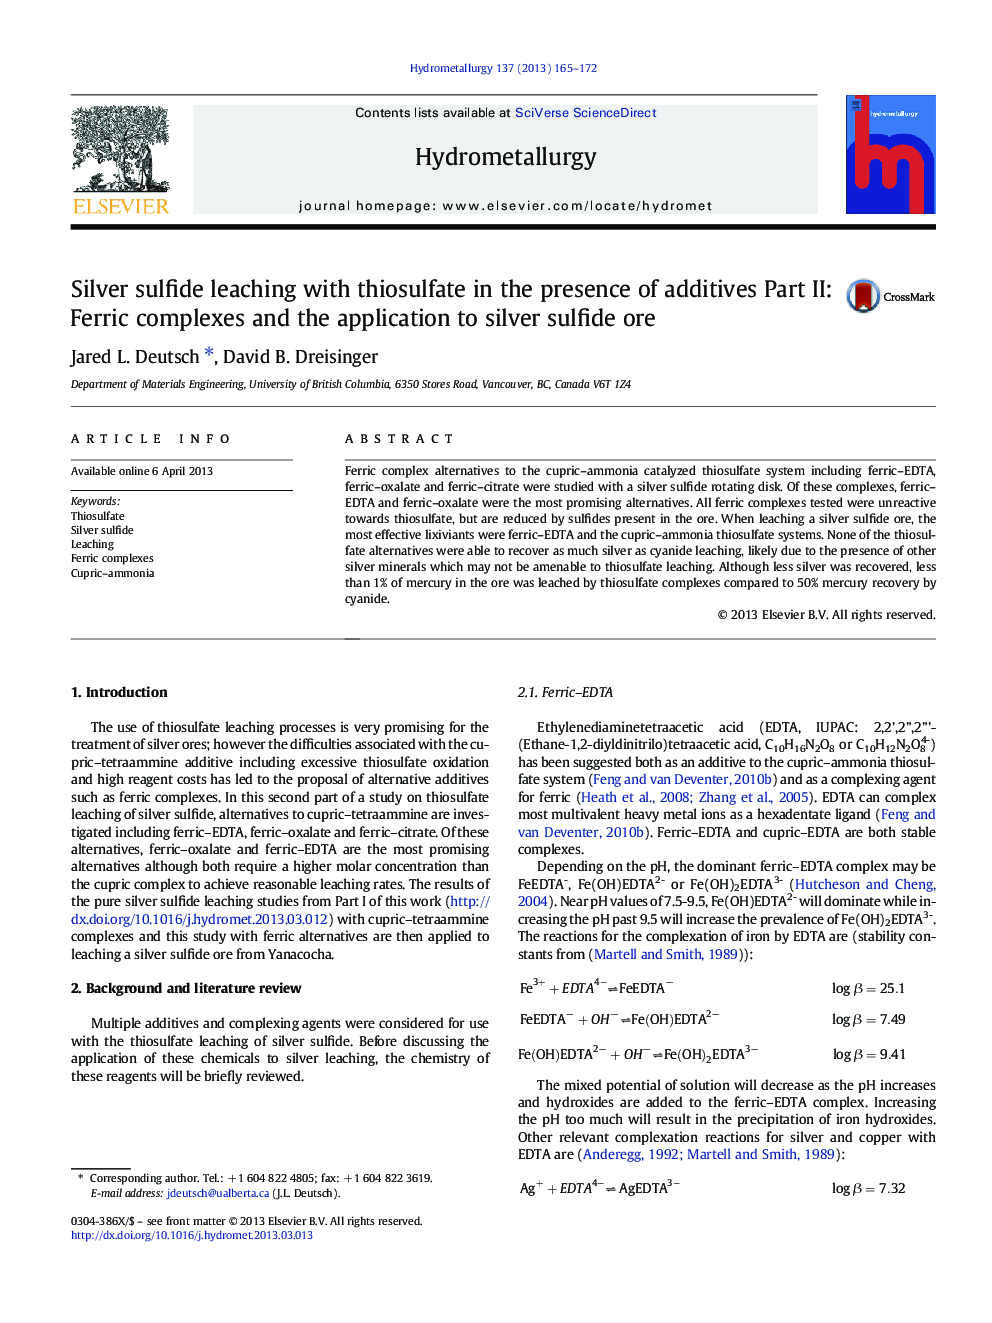 Silver sulfide leaching with thiosulfate in the presence of additives Part II: Ferric complexes and the application to silver sulfide ore